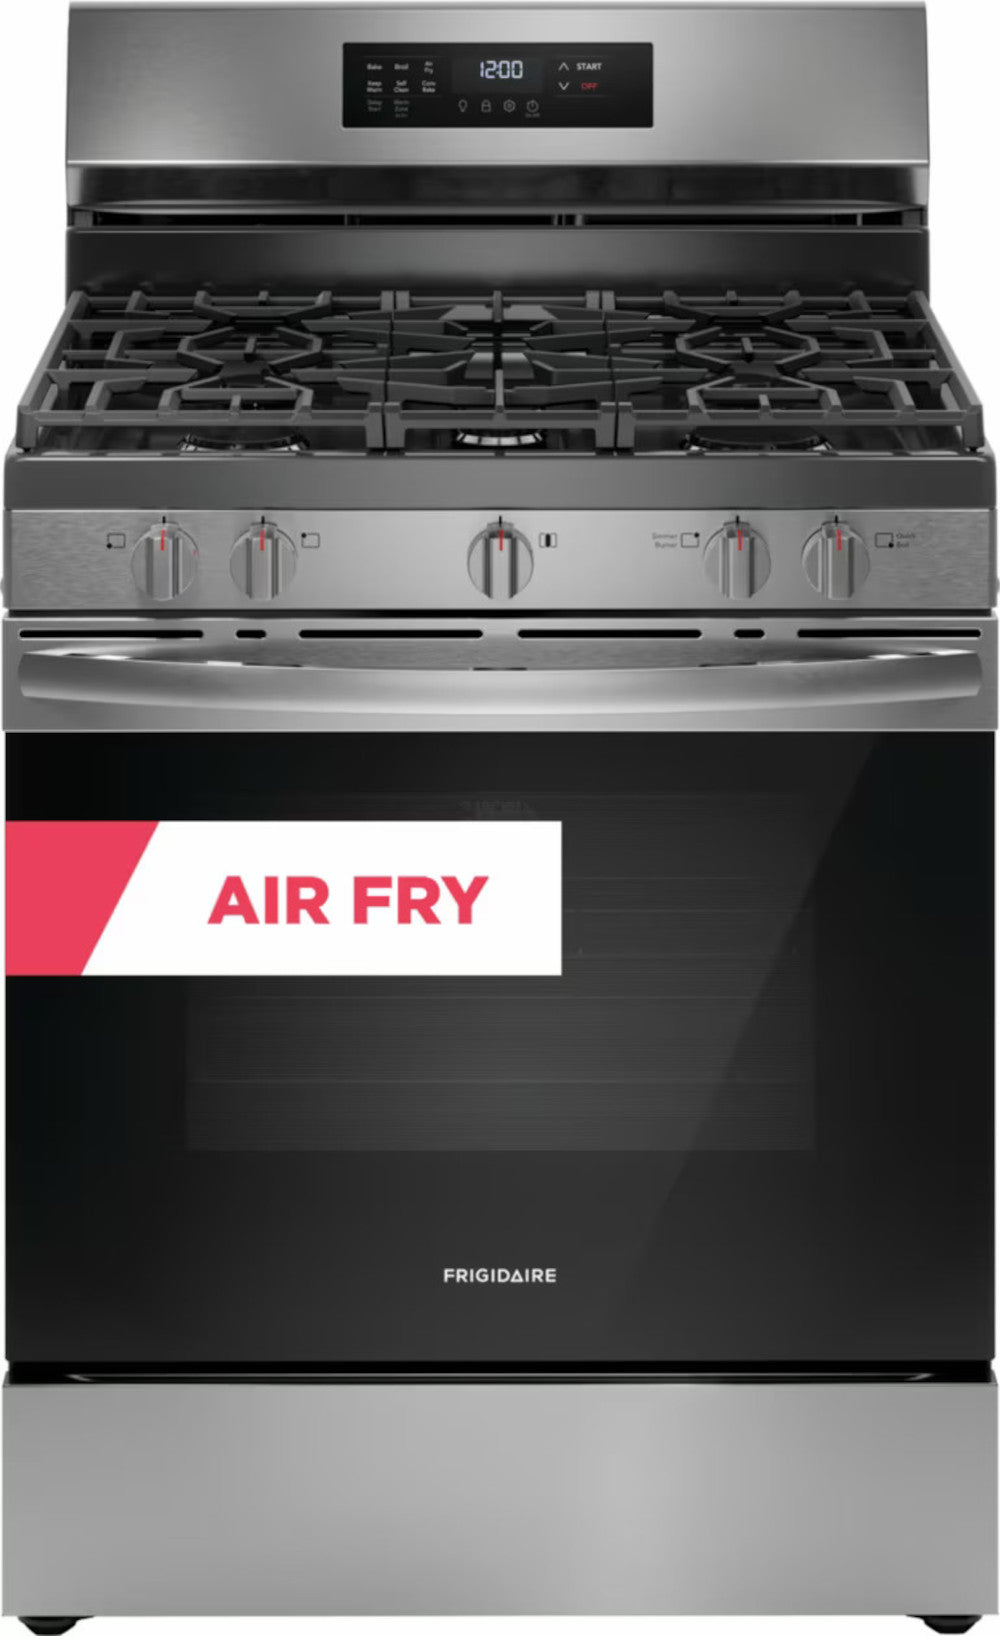 Frigidaire - 5.1 cu. ft  Gas Range in Stainless - FCRG3083AS